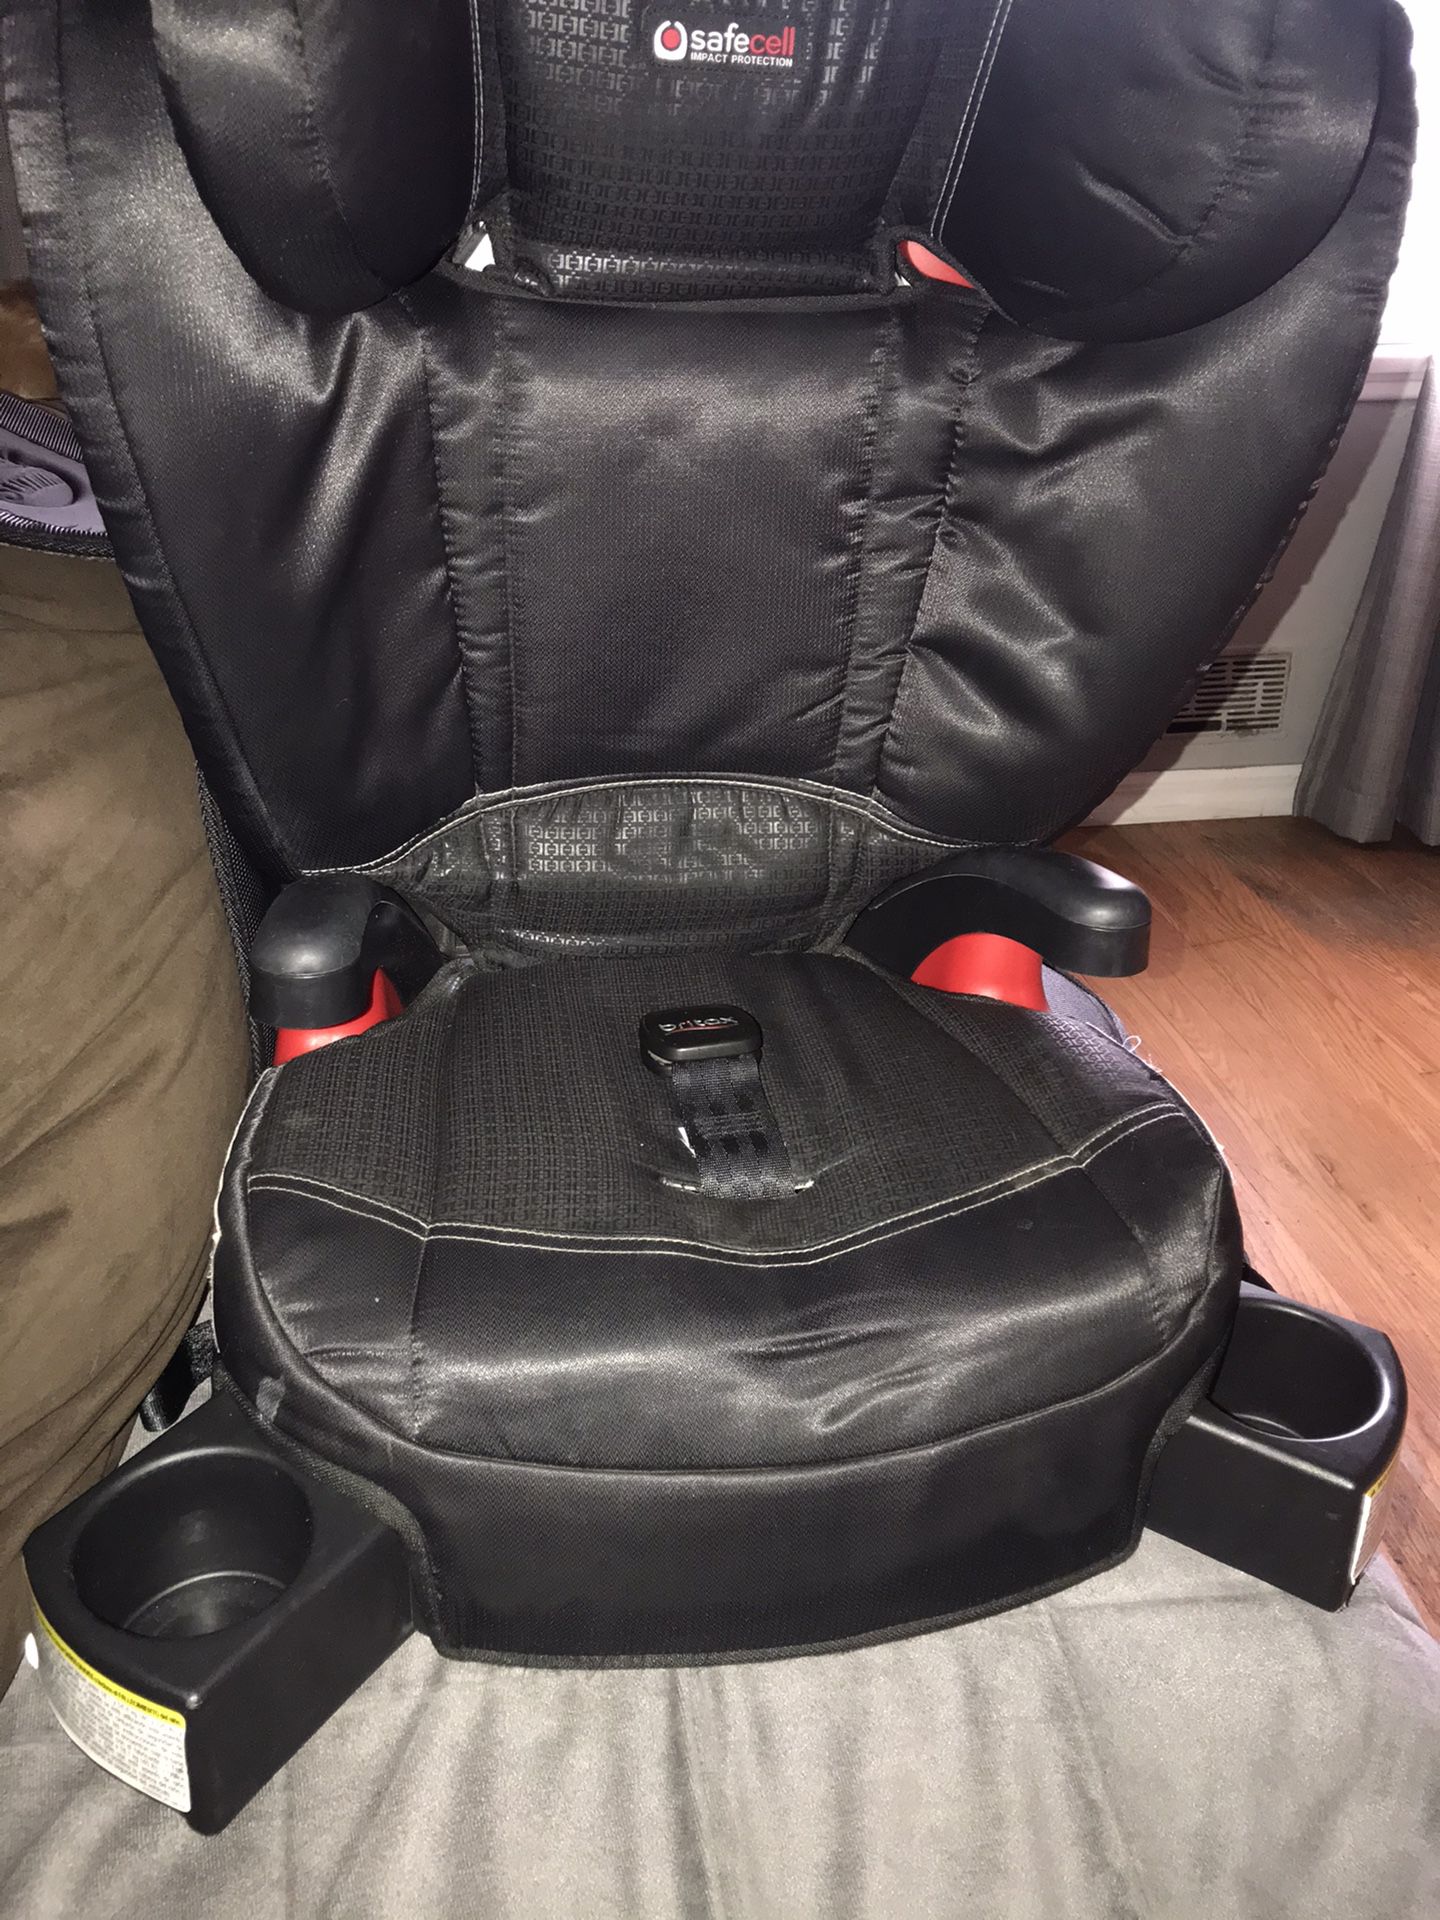 Booster seat